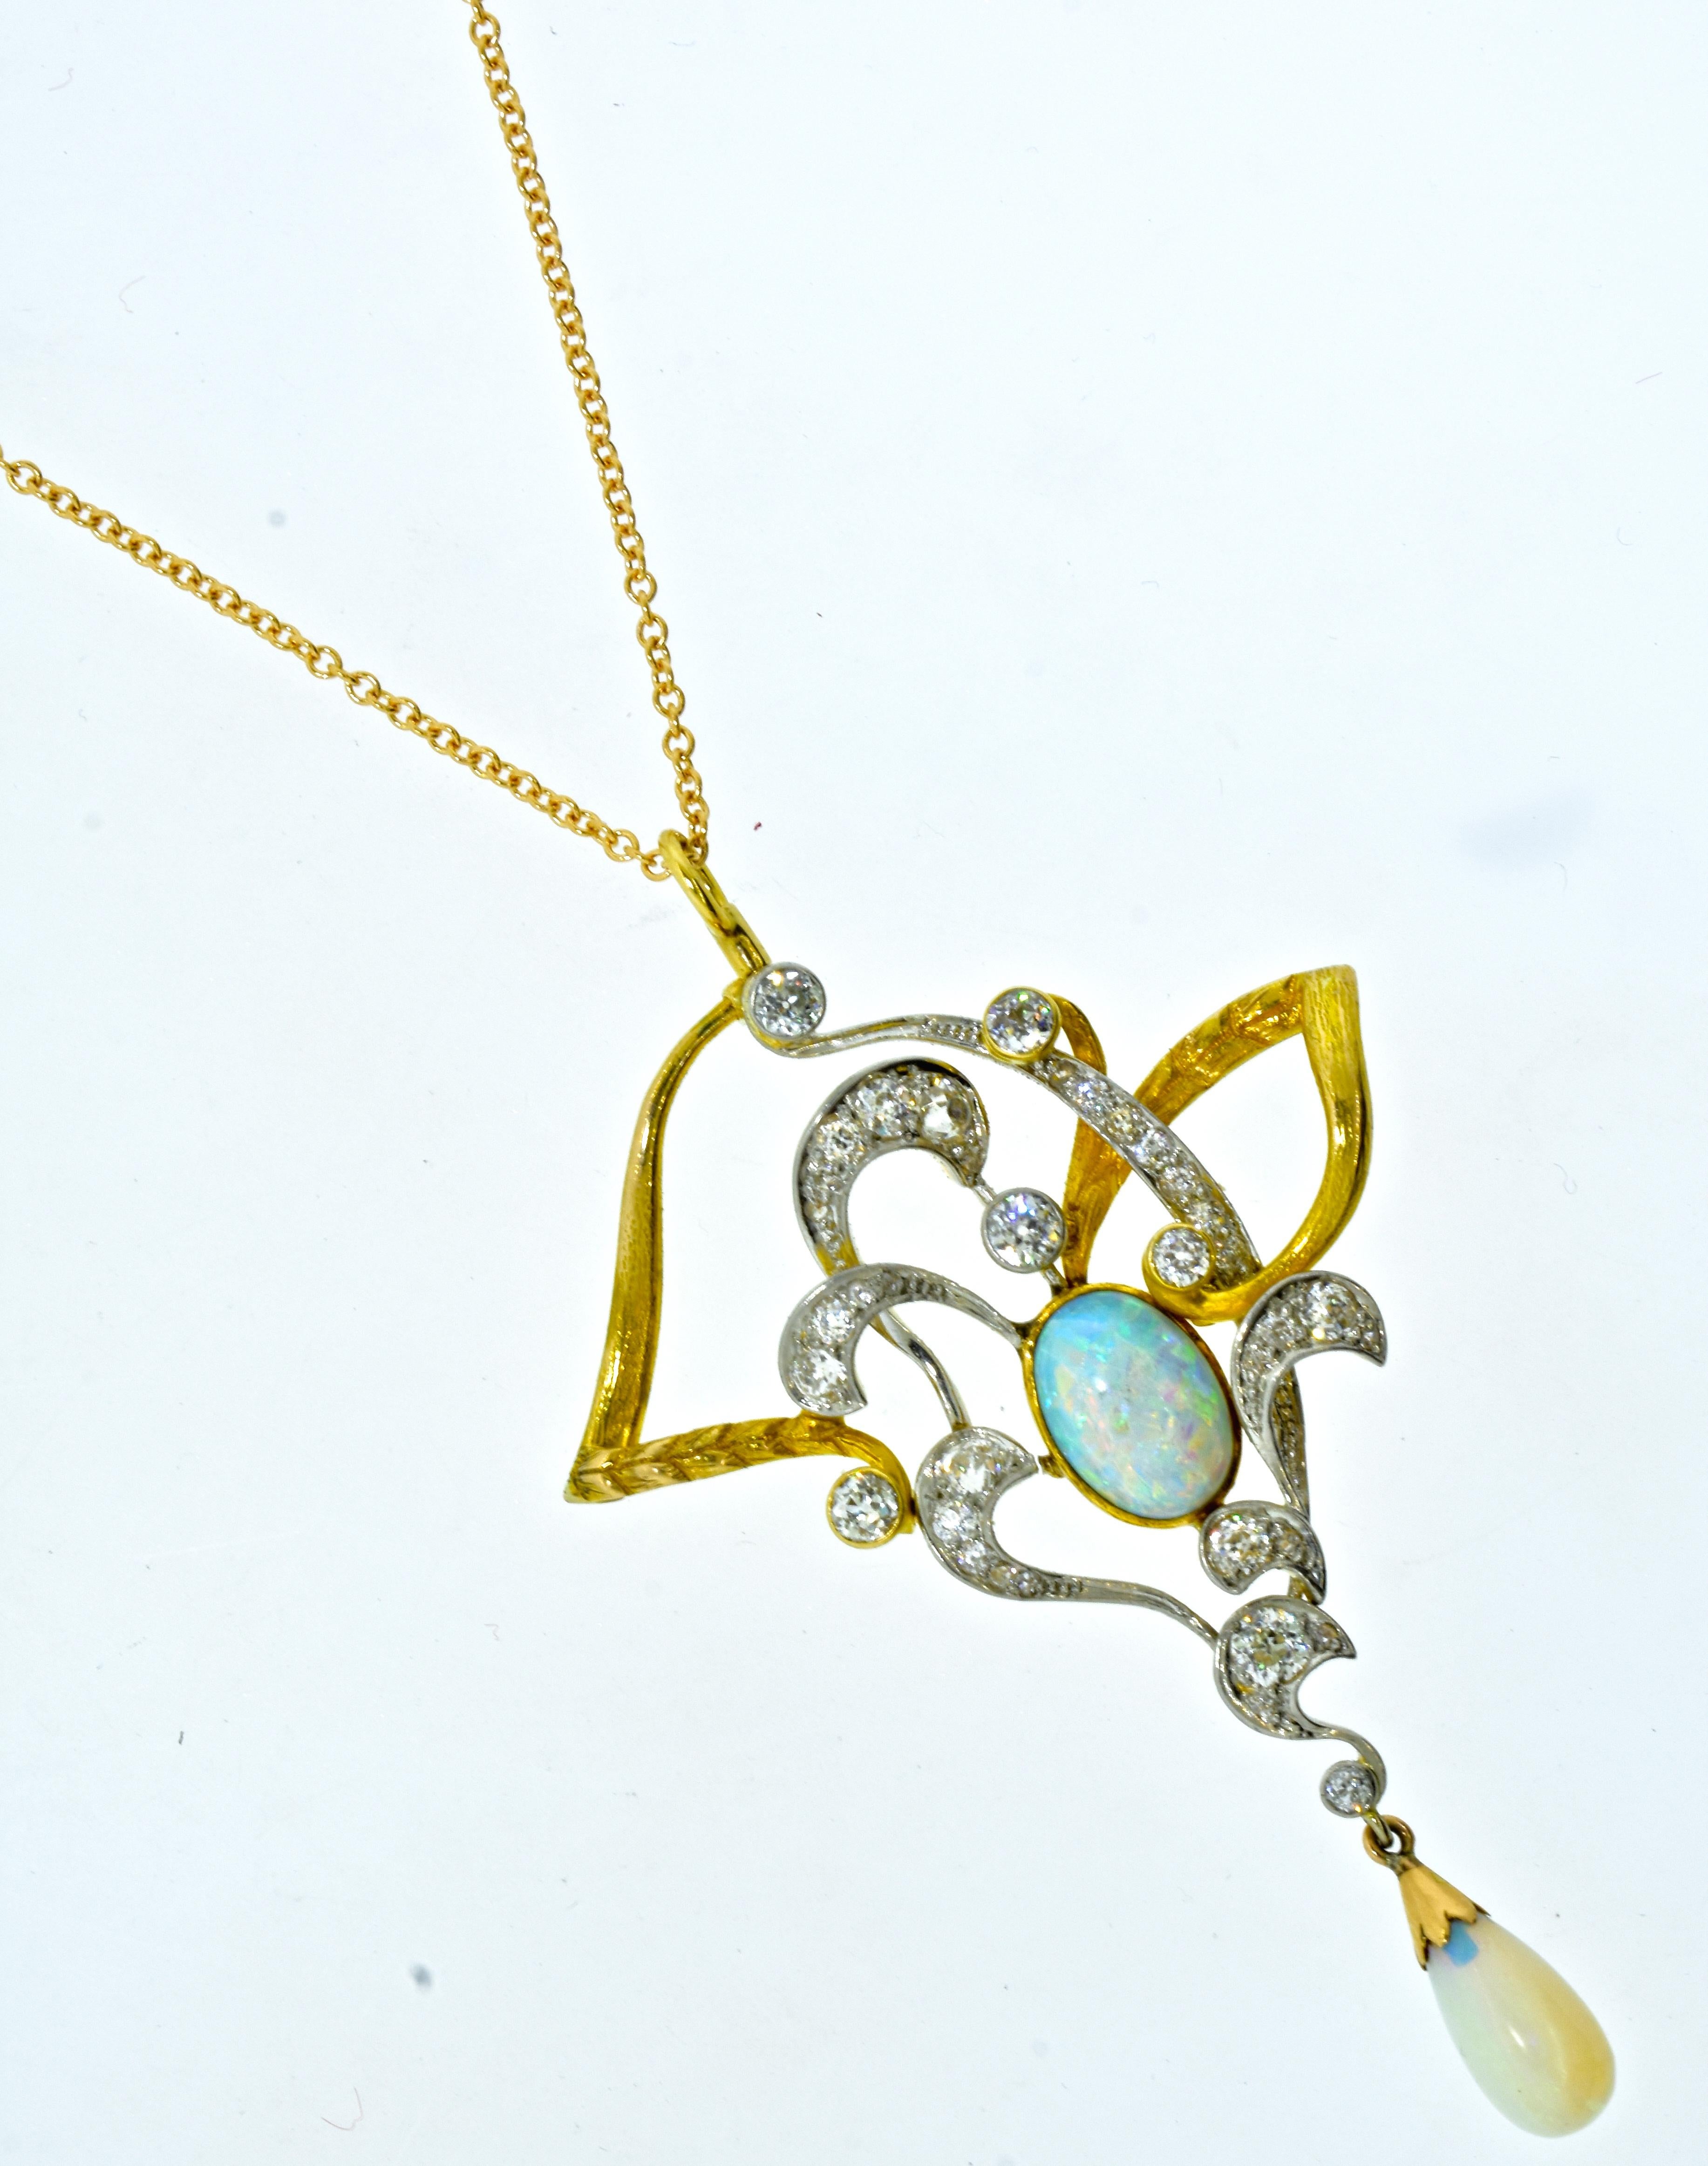 Art Nouveau pendant in platinum and yellow gold.  The asymmetrical pendant is 2.5 inches long, centering a blue, green and red opal measuring 11.0 mm. by 7.5 mm. by 4.0 mm., approximately. is accented with 35 European cut diamonds weighing an